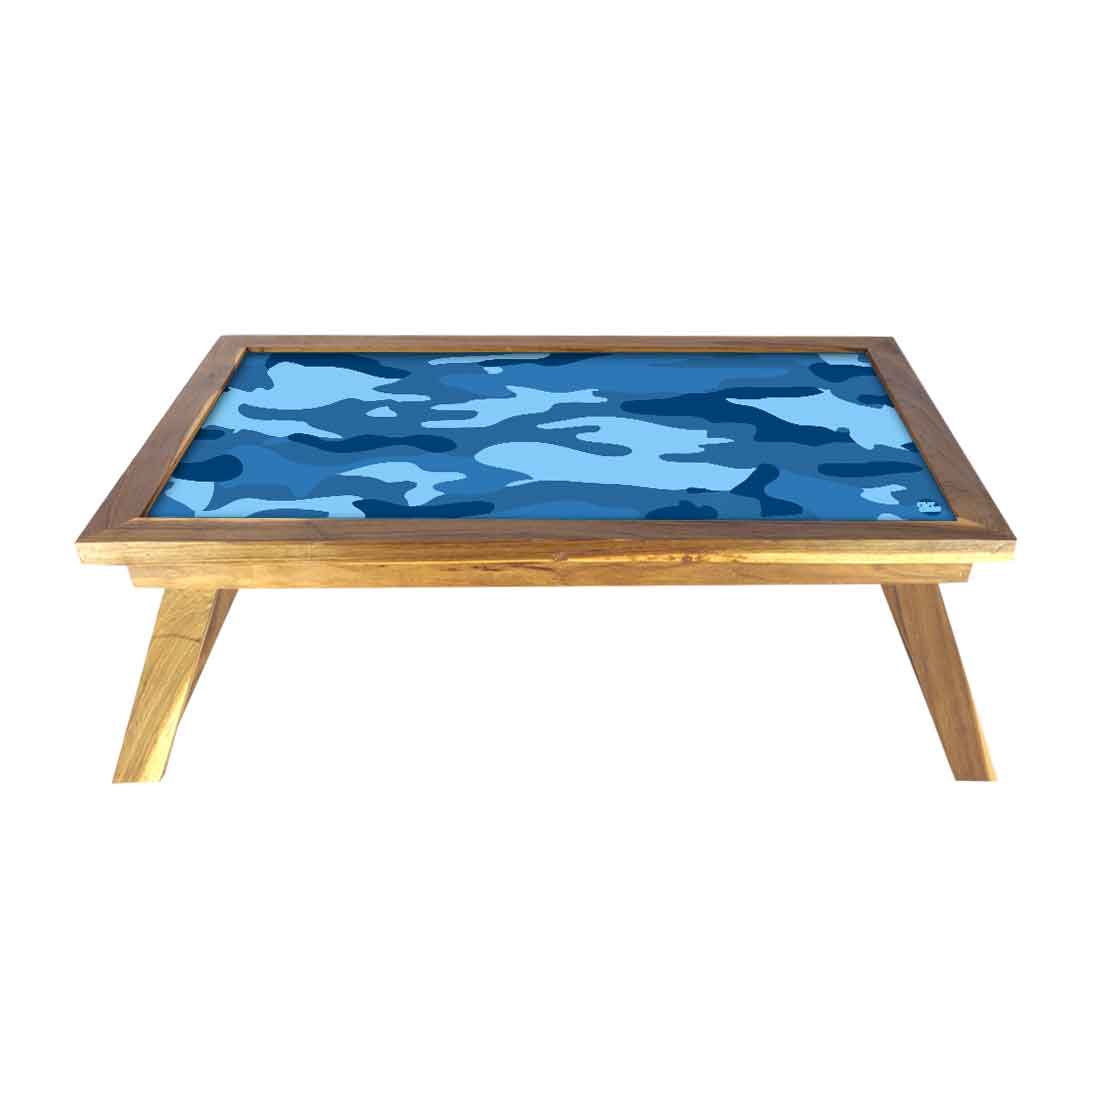 Nutcase Designer Lapdesk Breakfast Tray Table for Bed Teak Wooden Study Desk - Army Camouflage Blue Nutcase